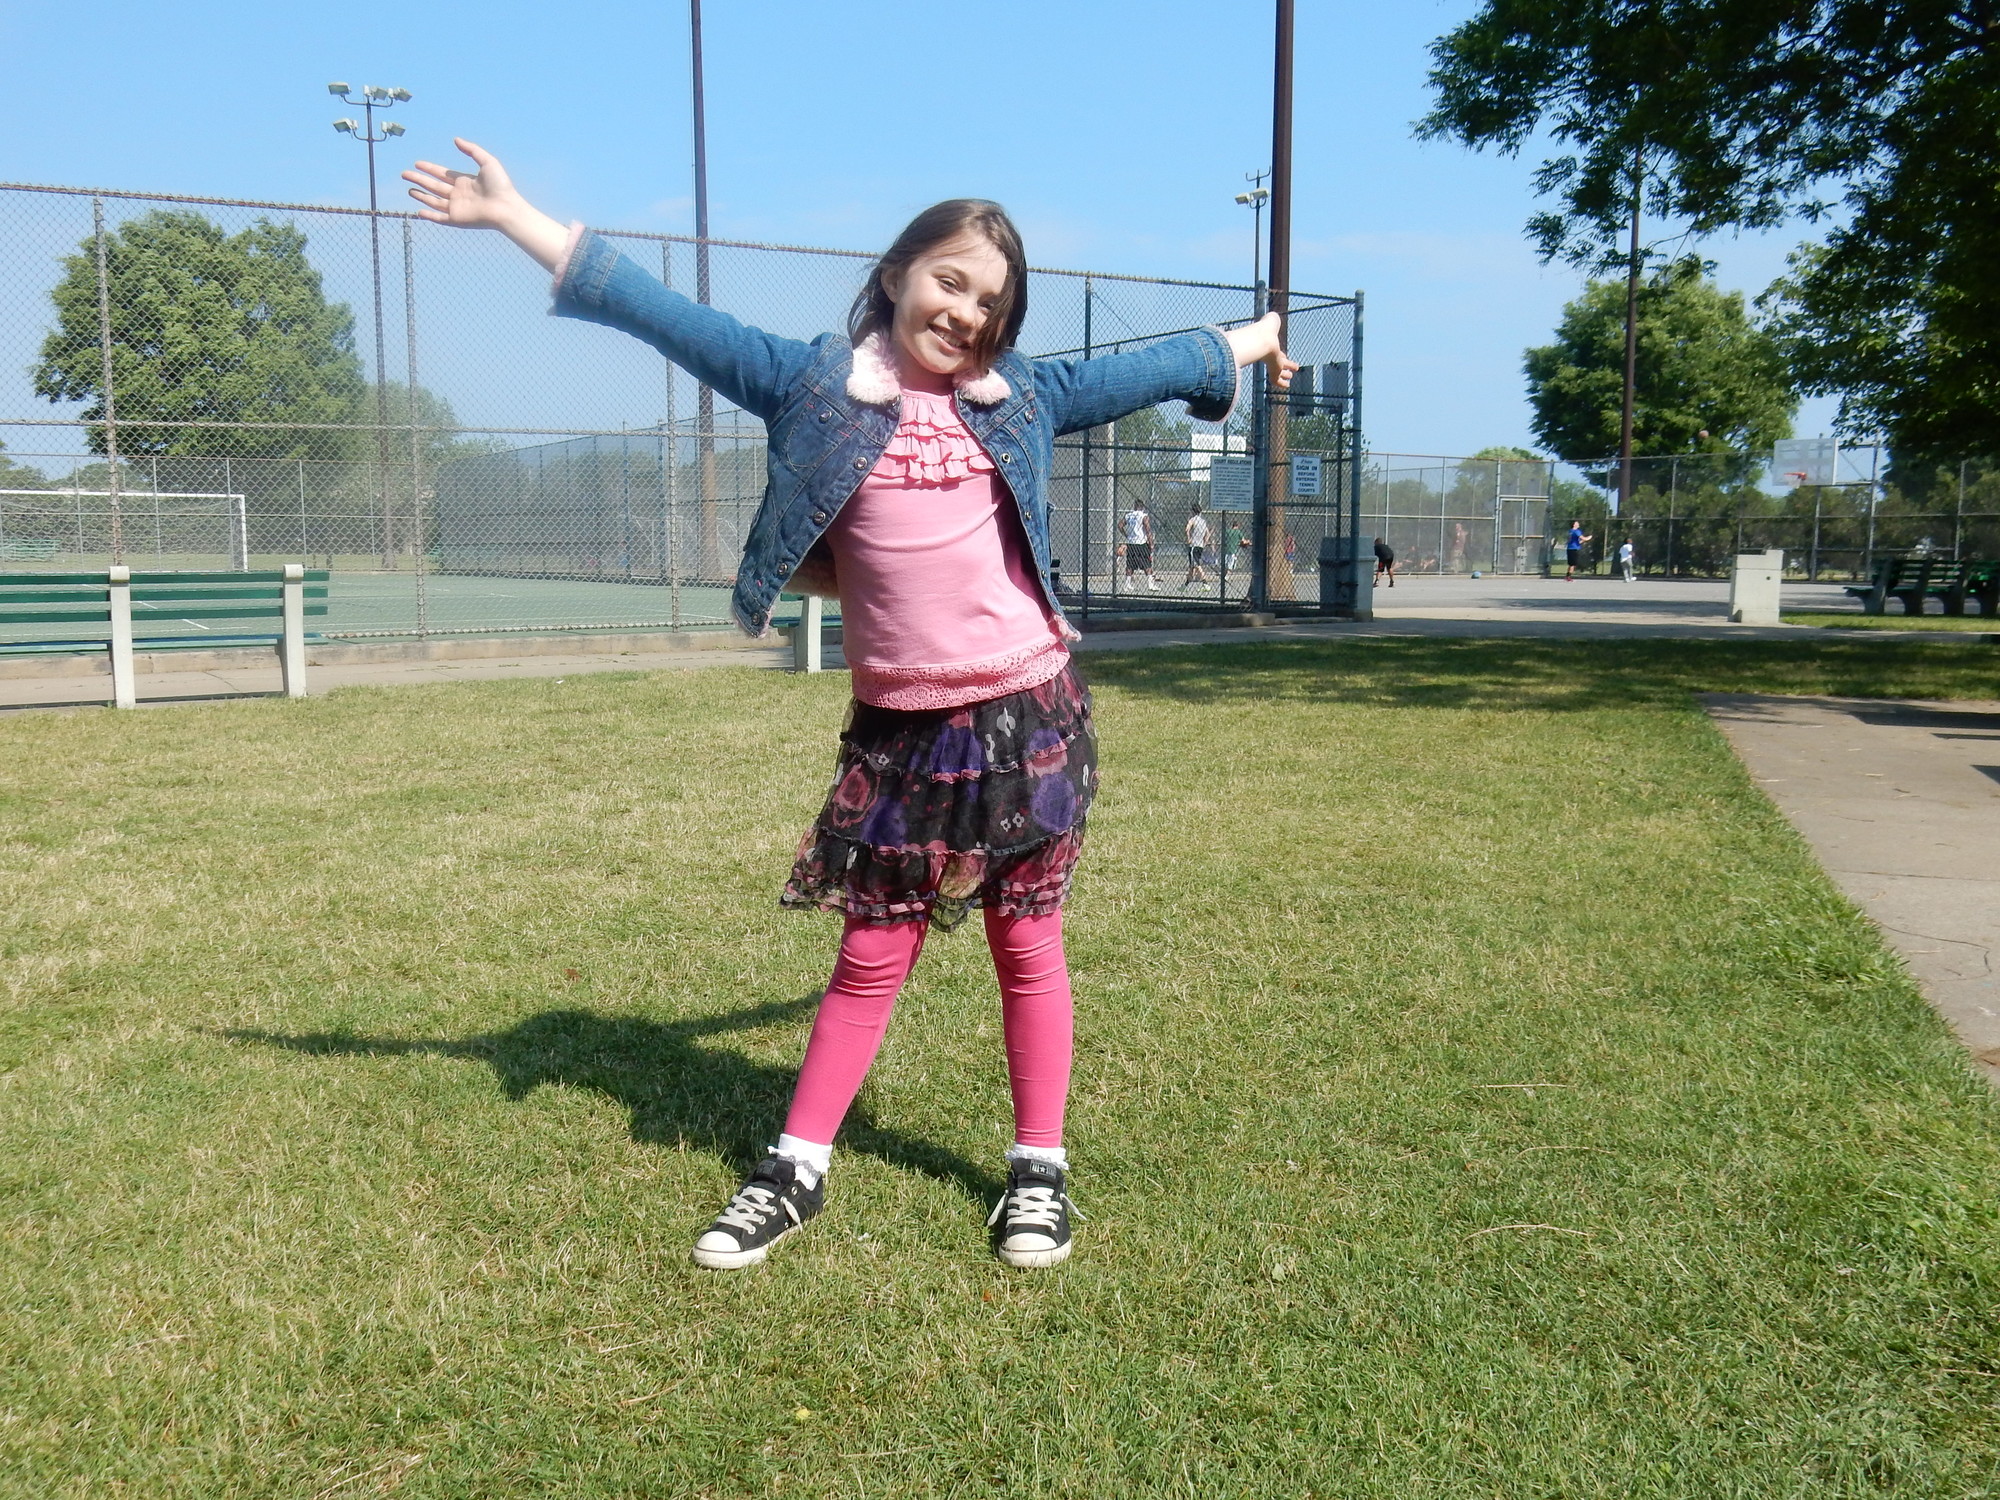 Giada Blume, 8, striking a pose at Speno Park, performed in eight shows of “Ever After” at the Paper Mill Playhouse from May 21 to June 21.